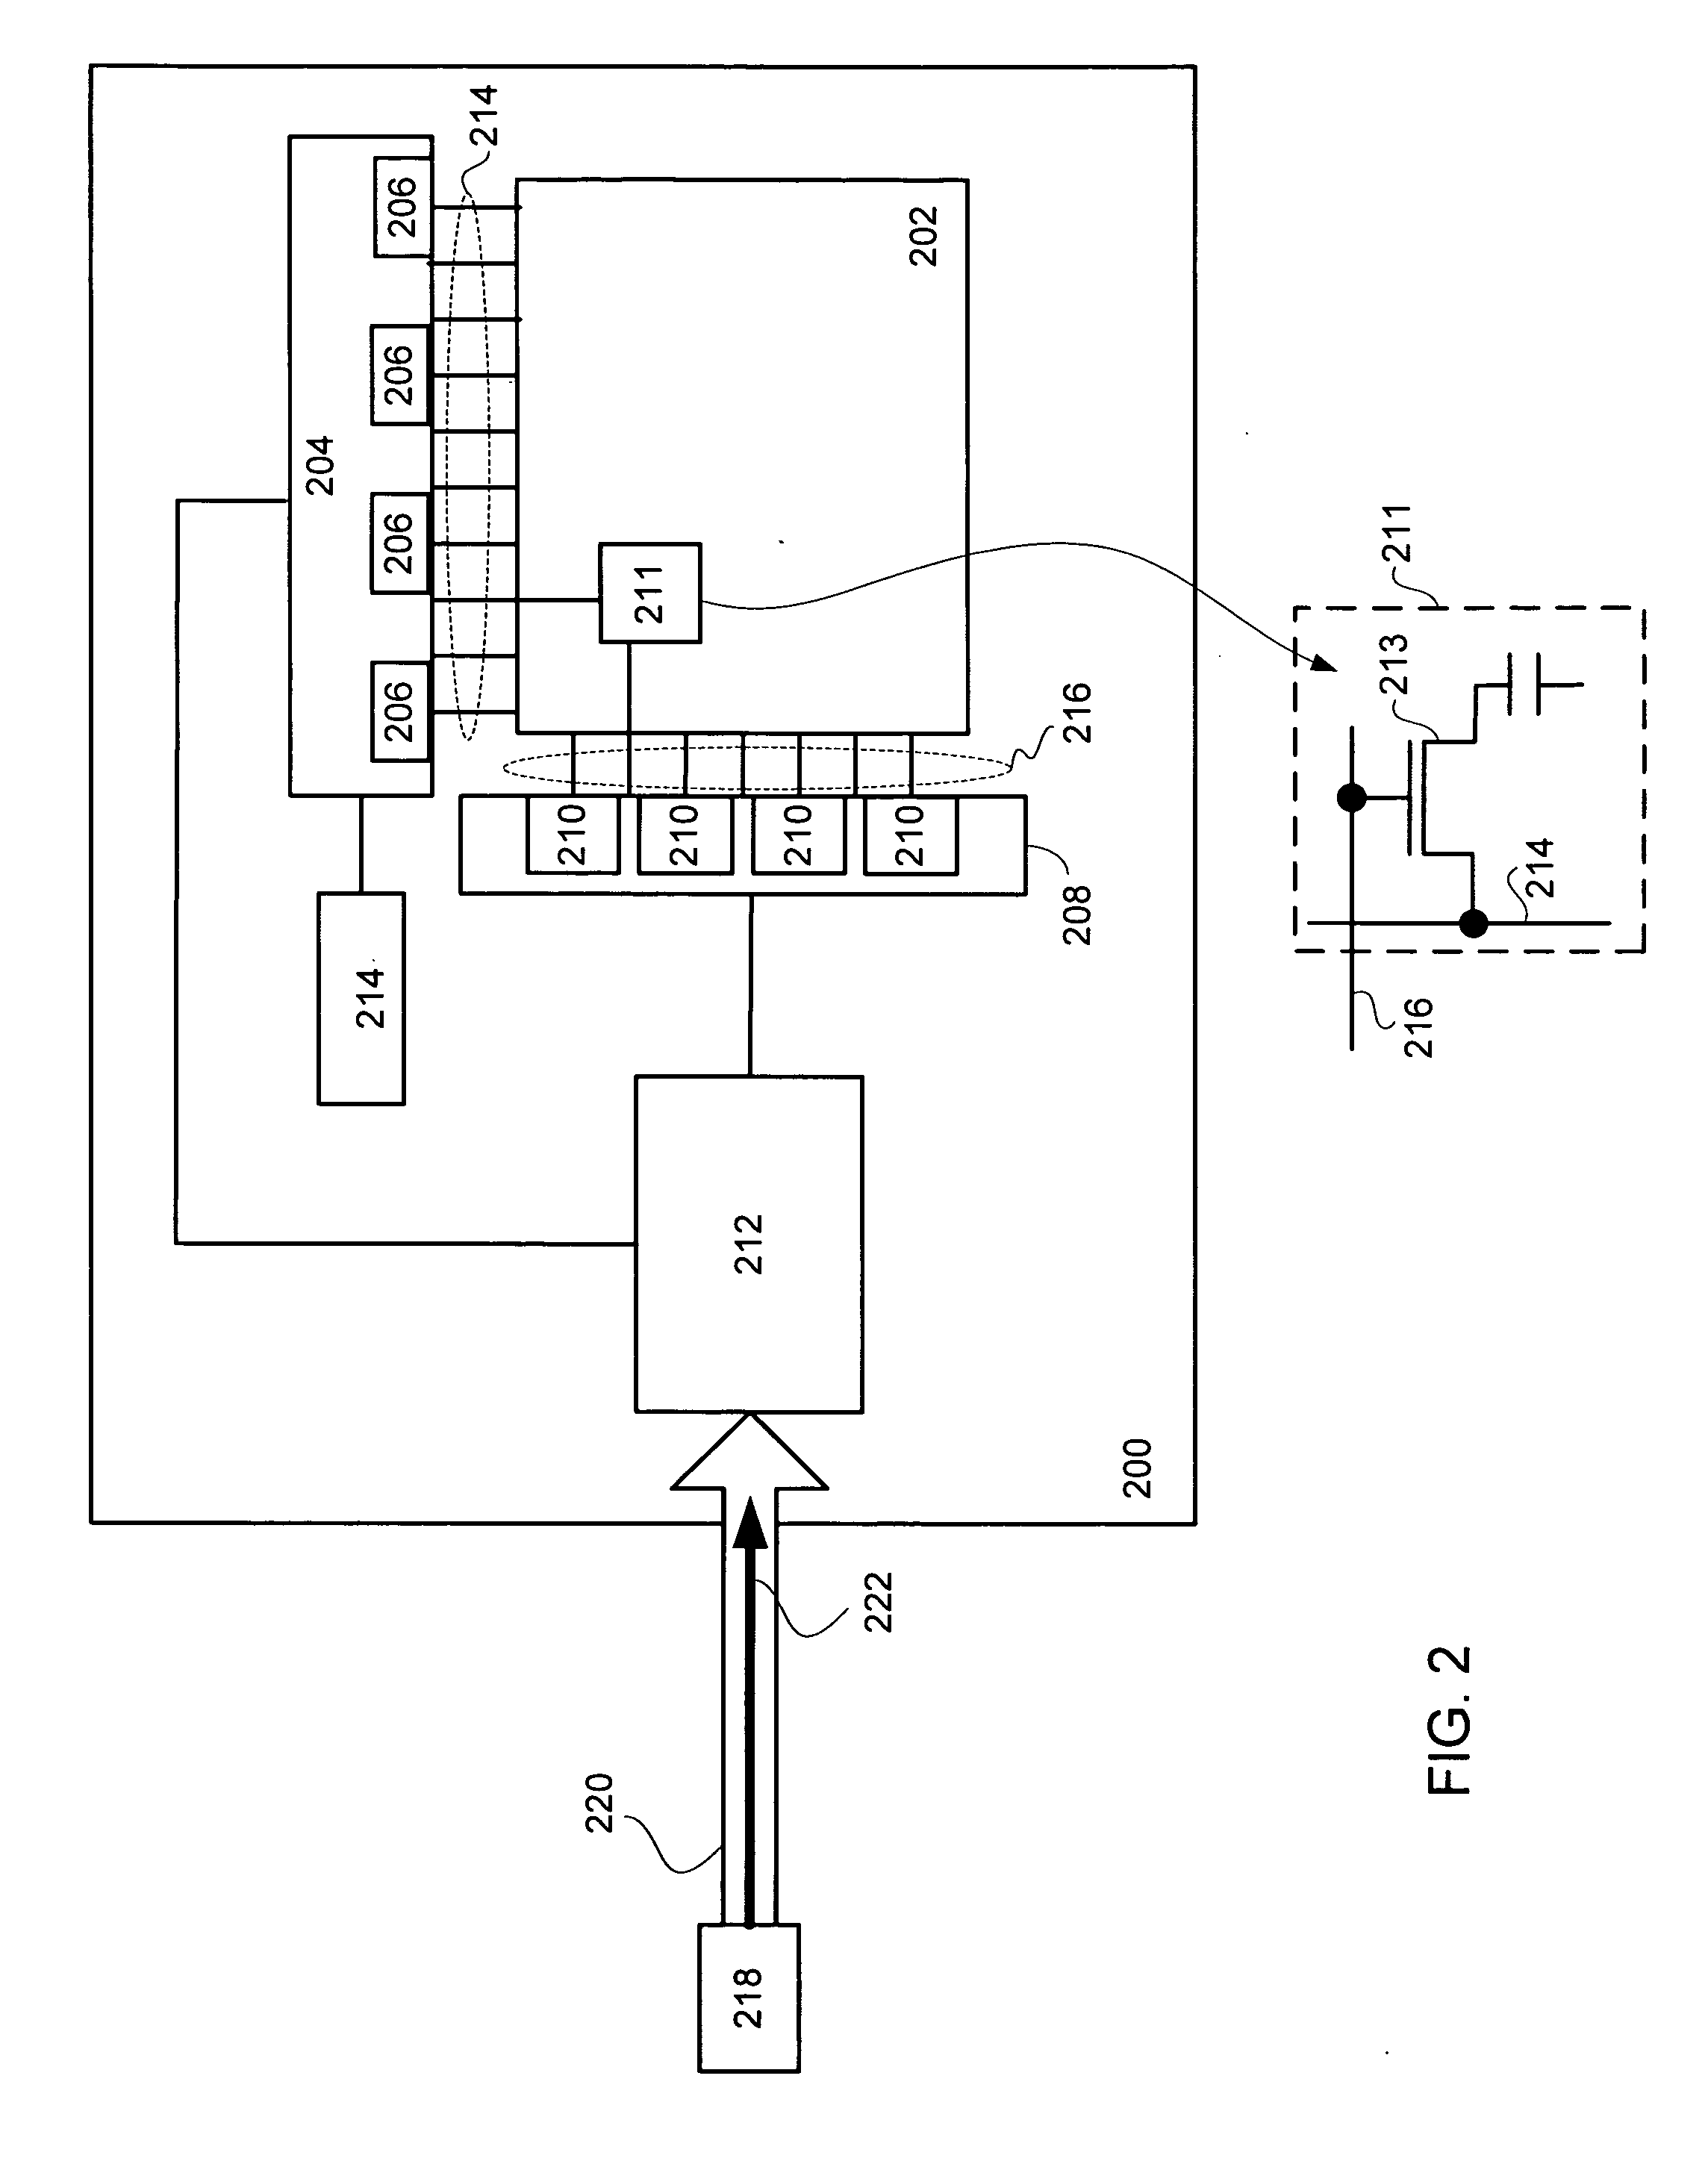 Selective use of LCD overdrive for reducing motion artifacts in an LCD device